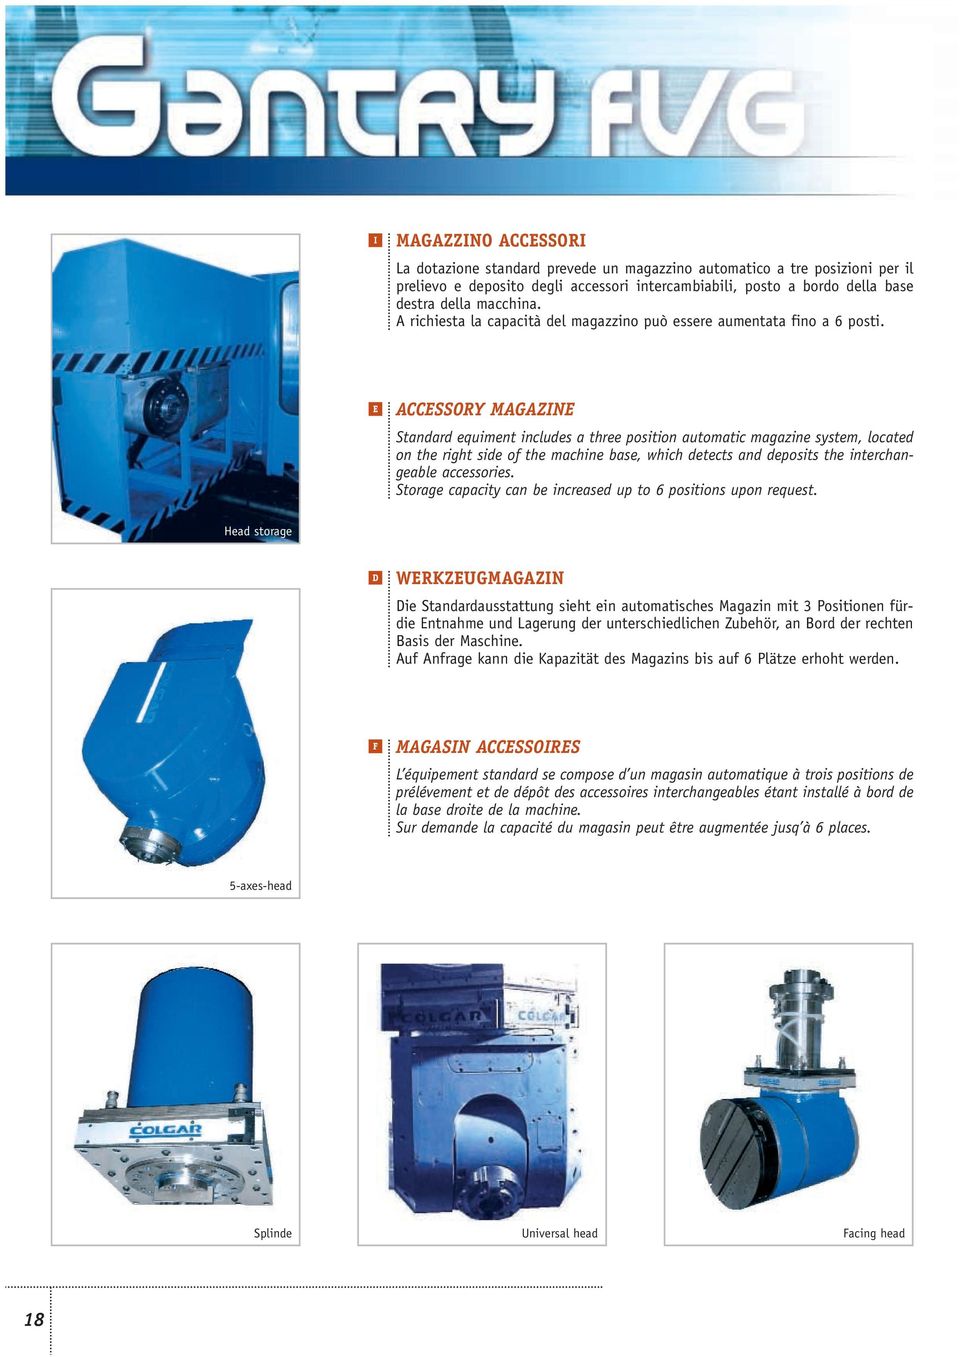 E ACCESSORY MAGAZINE Standard equiment includes a three position automatic magazine system, located on the right side of the machine base, which detects and deposits the interchangeable accessories.